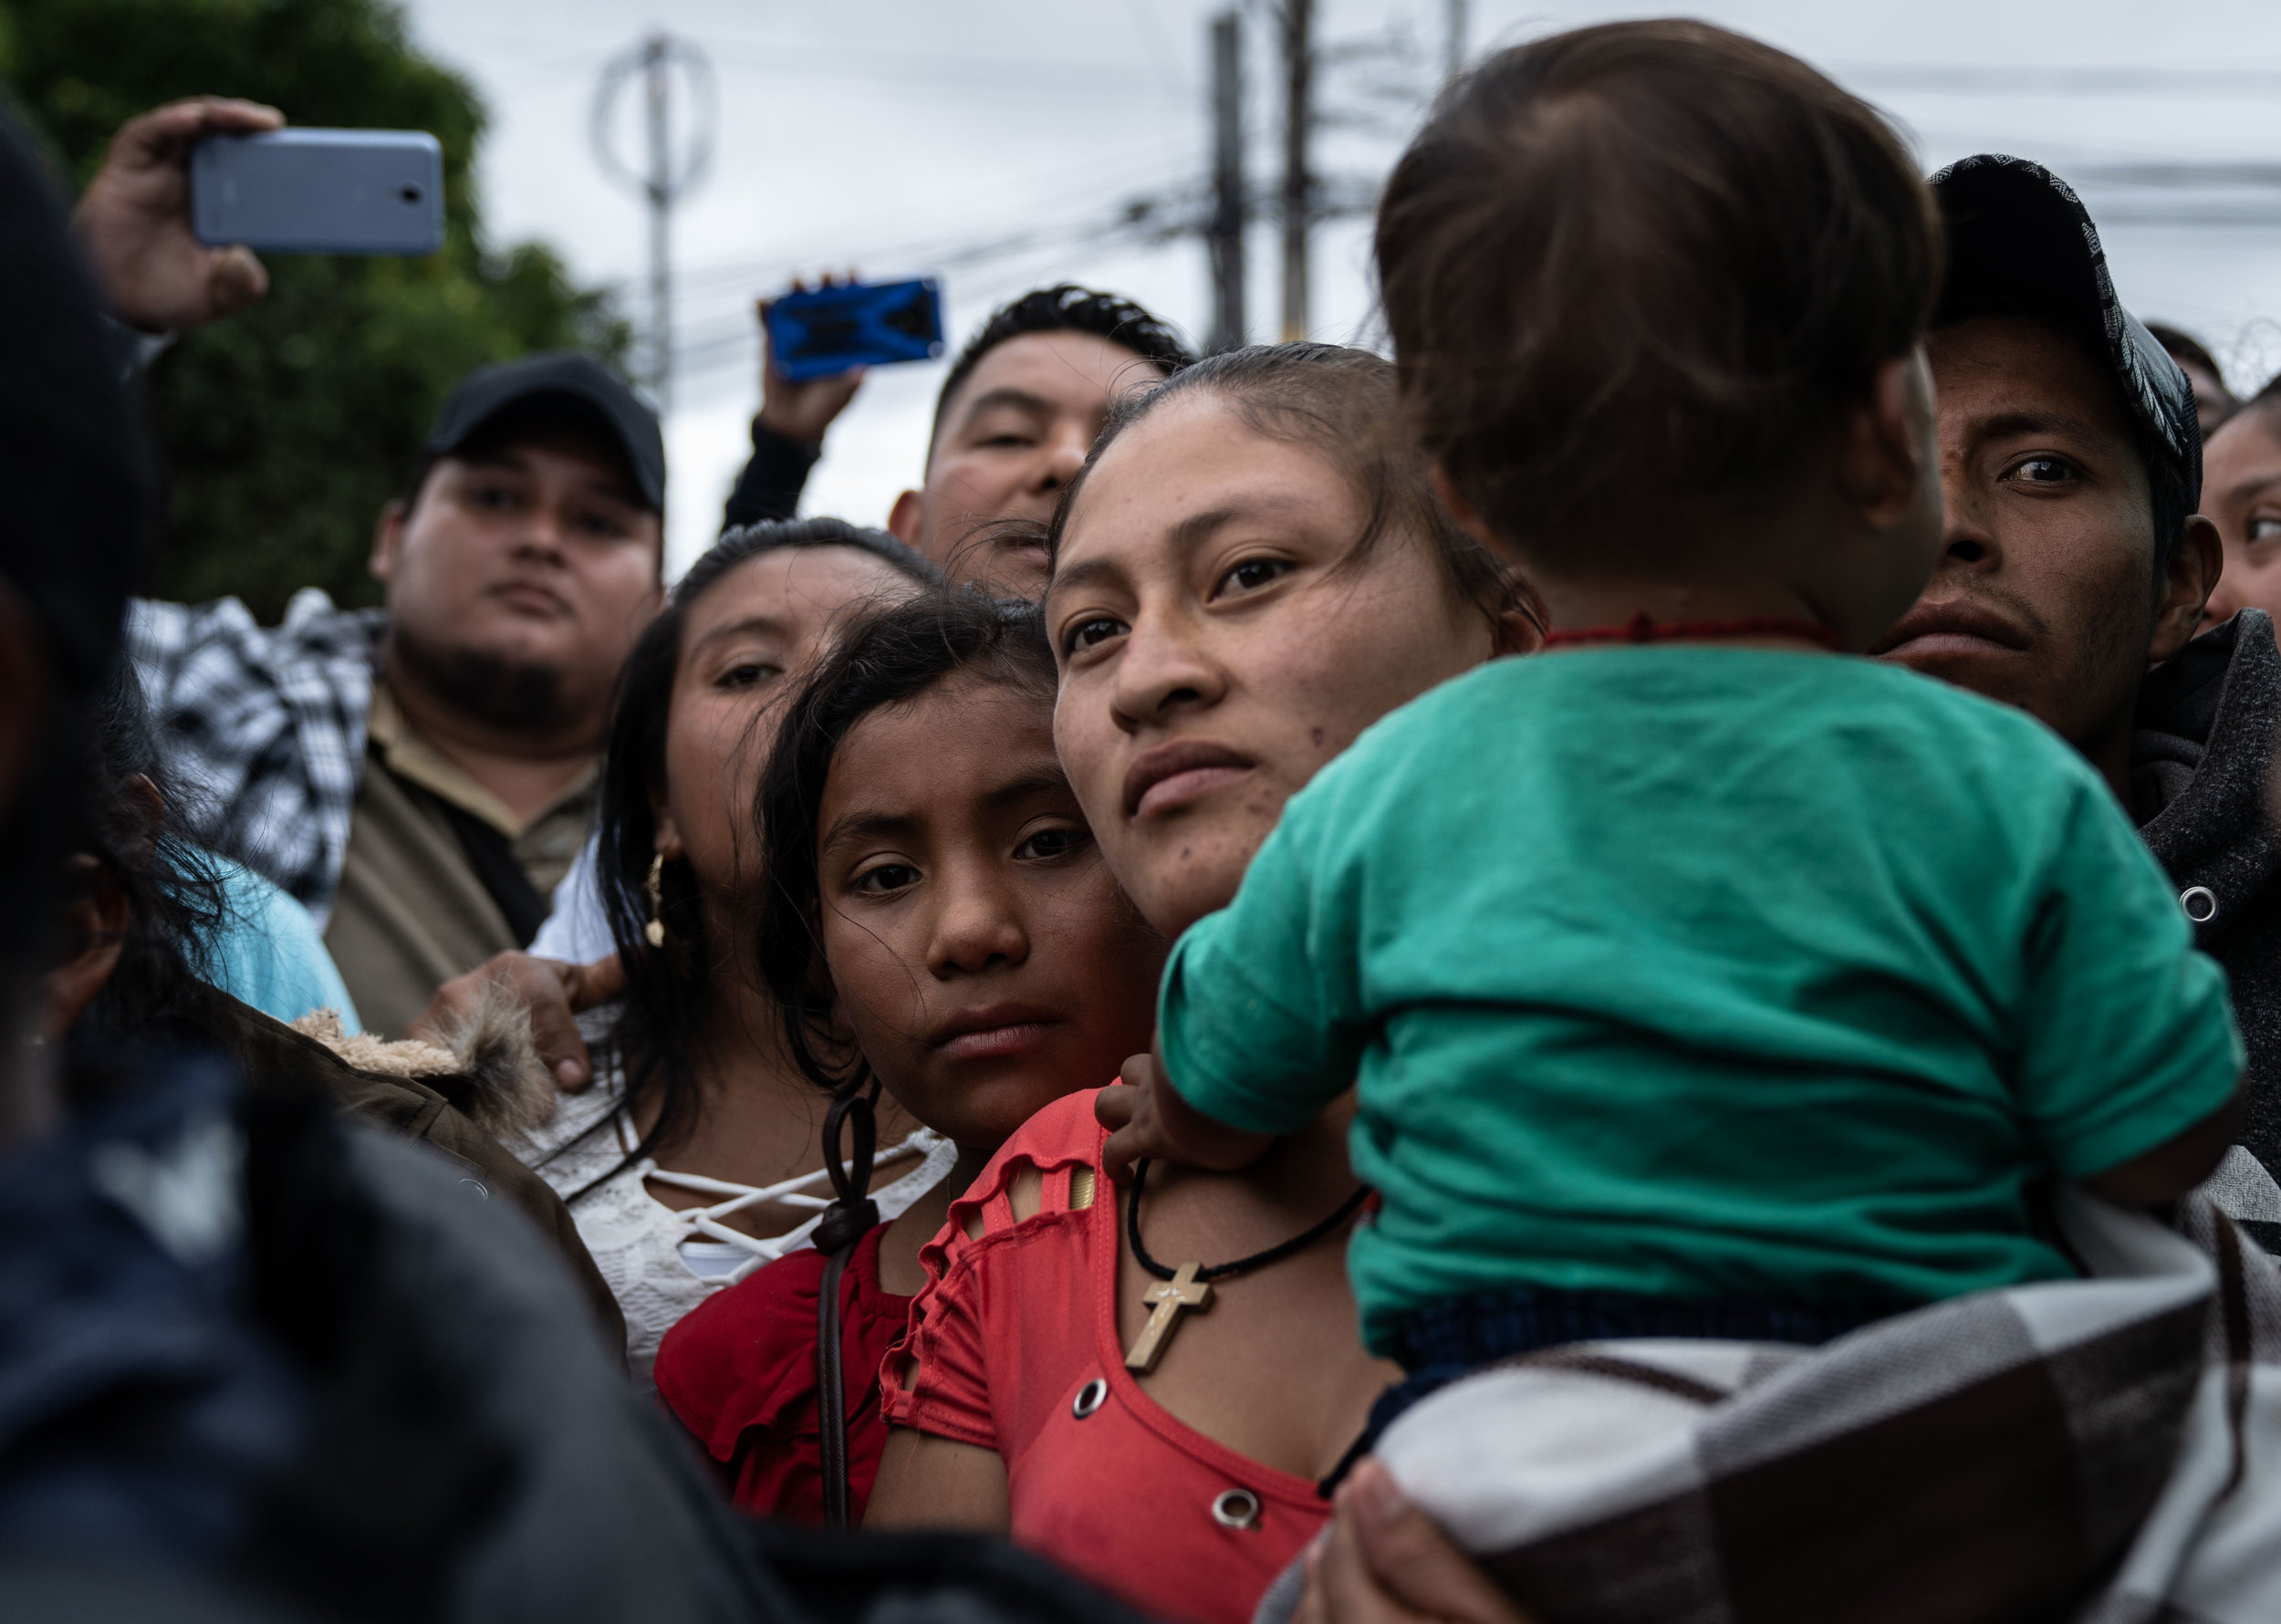   Family members and loved ones wait for deportees to exit a Repatriation Center in Guatemala City in May, 2019.  